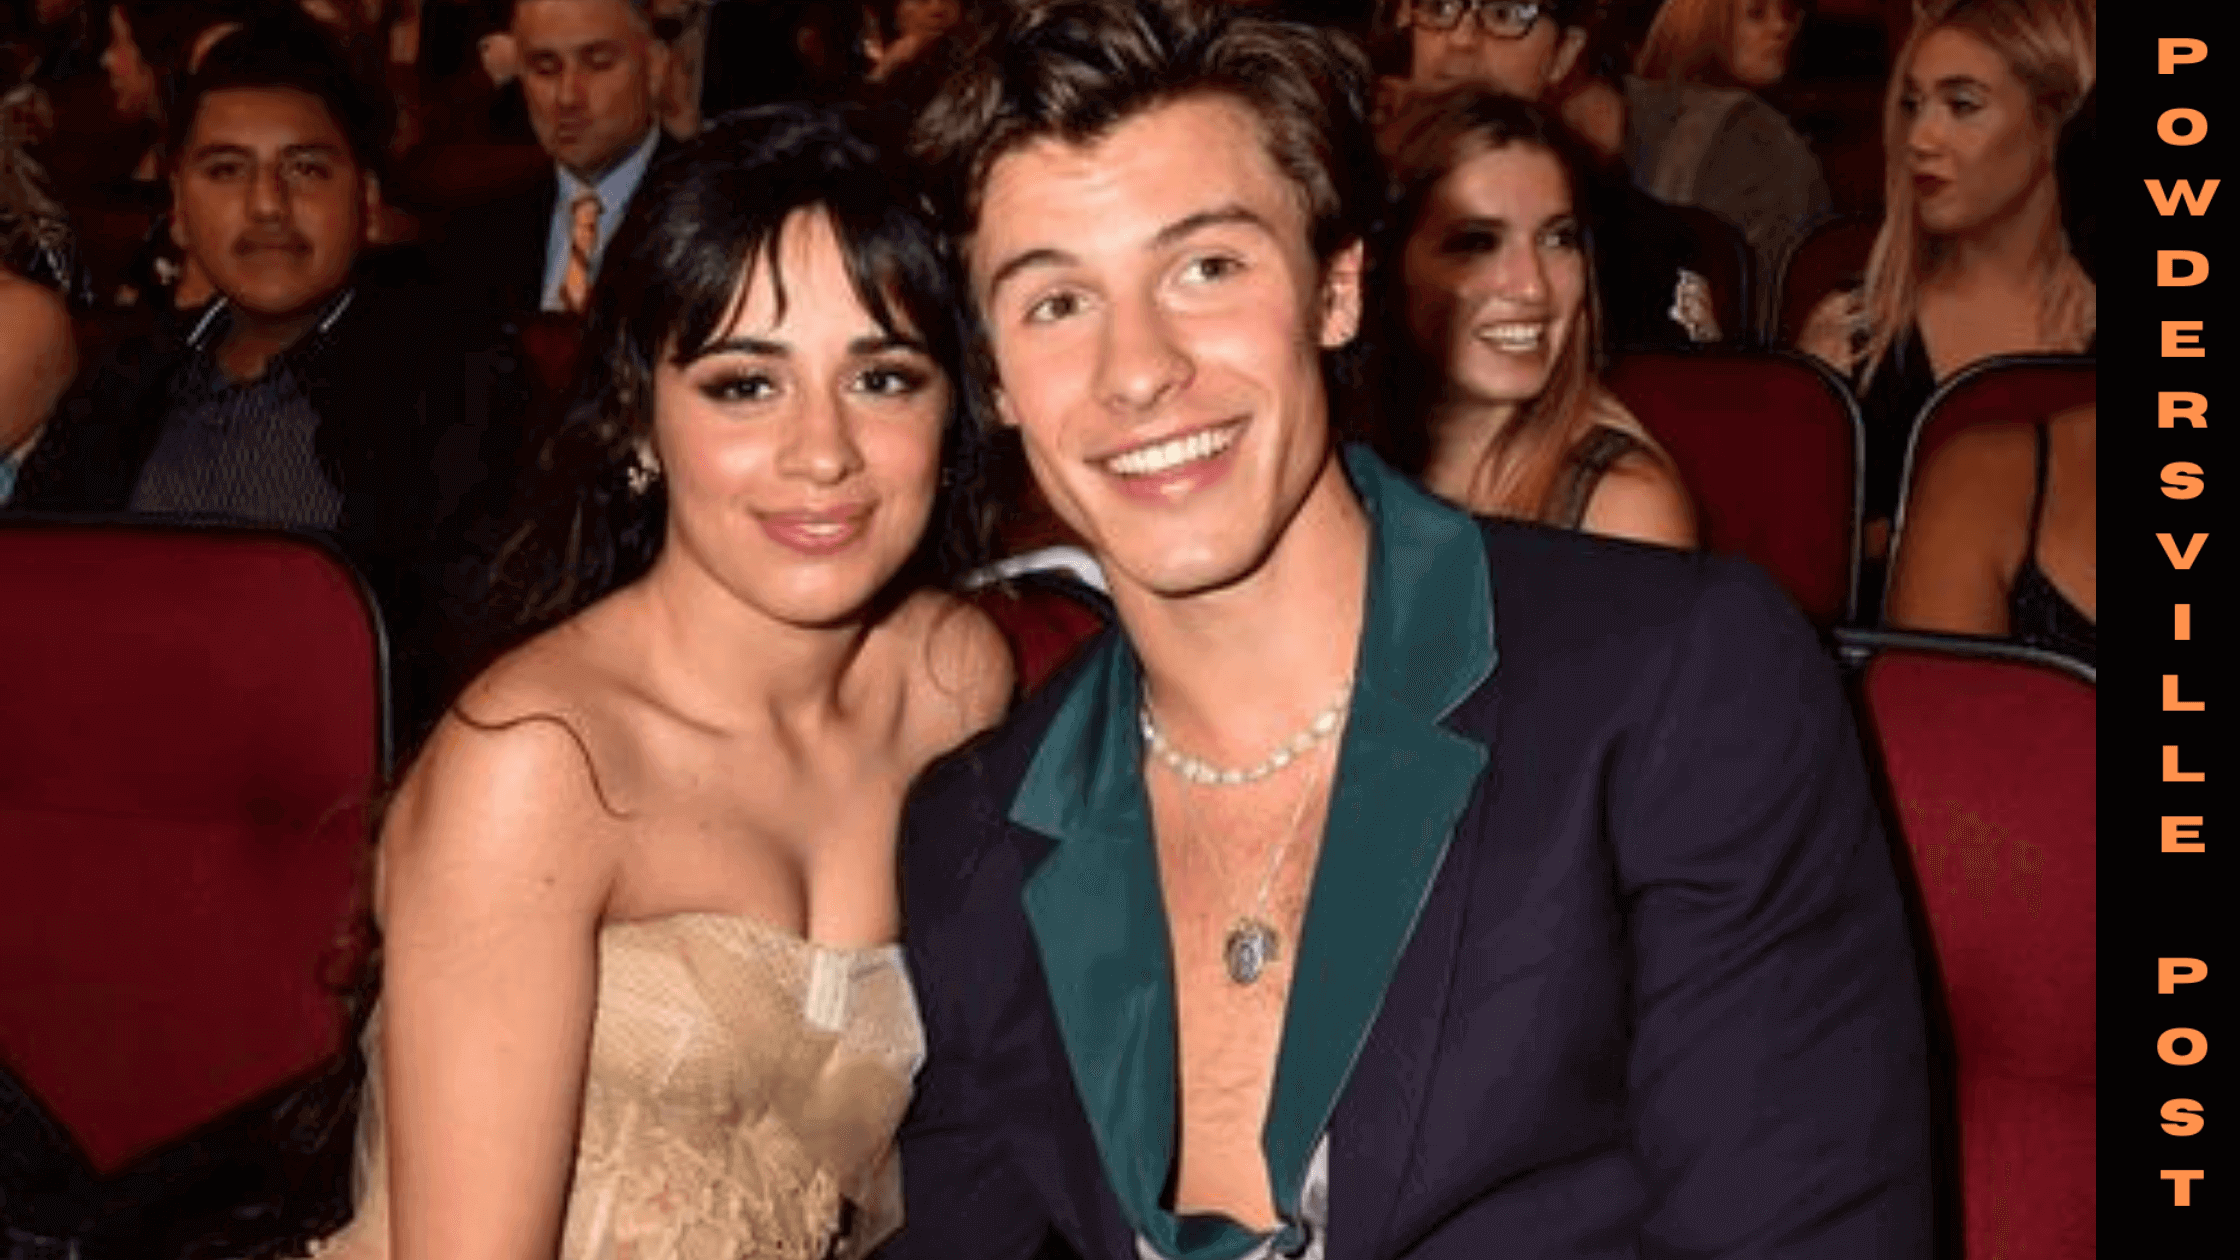 Shawn Mendes Drops An Emotional Video About Life After Camila Cabello